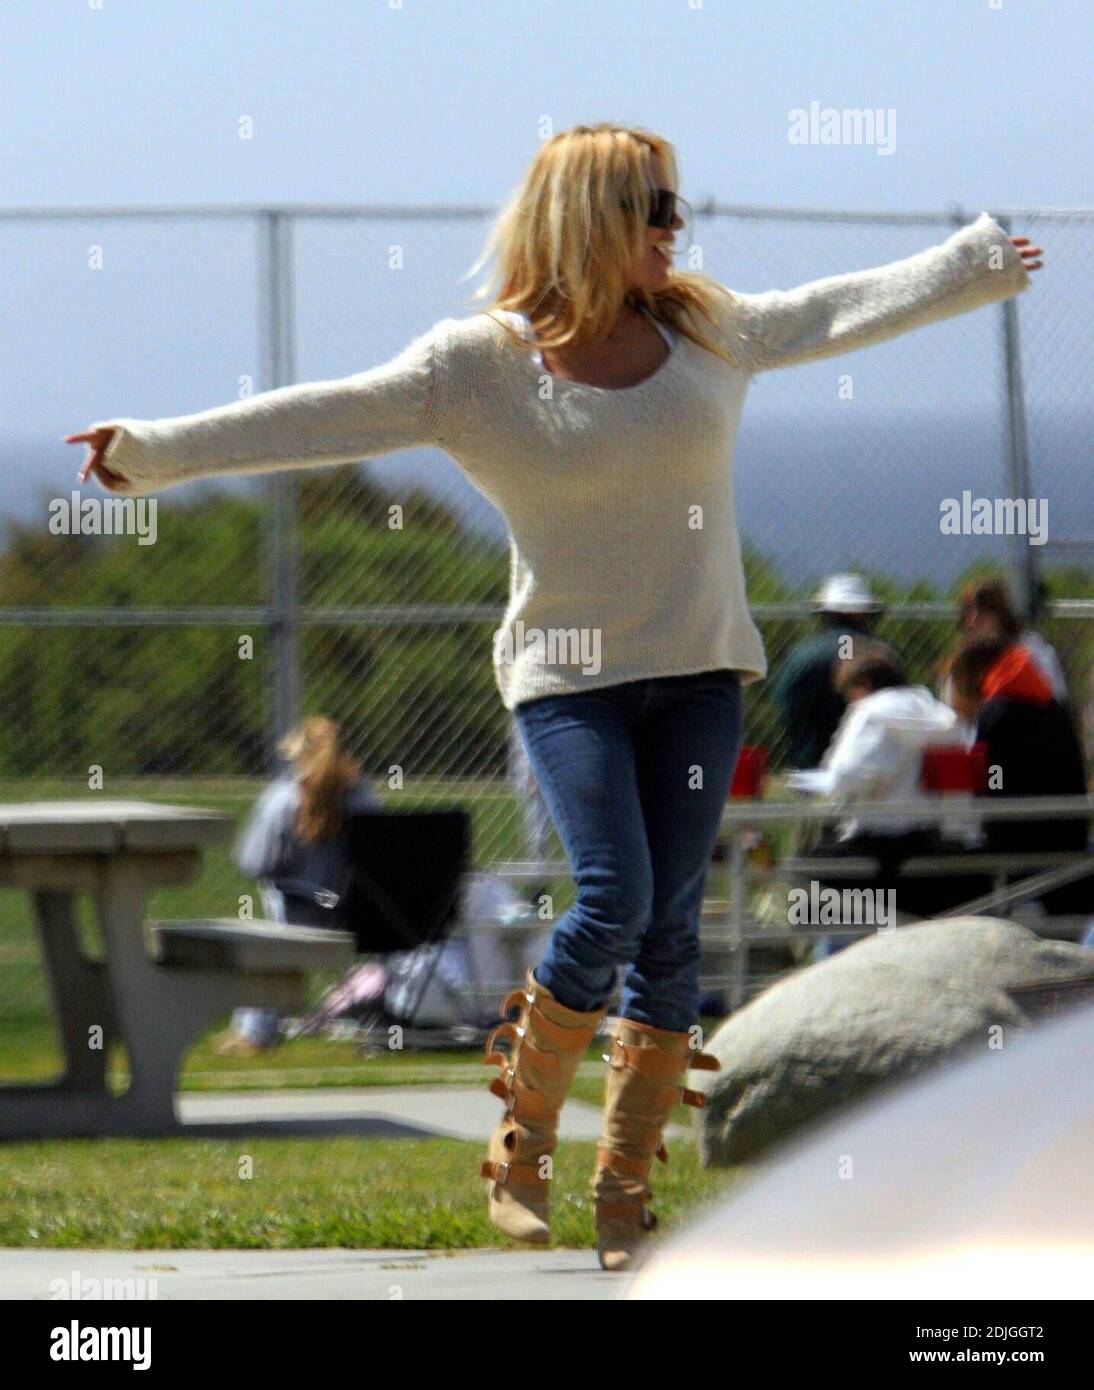 Exclusive!! Pamela Anderson appears to have an aching back. The ex Baywatch beauty known for her ample assets,  was stretching as she waited for her sons to finish playing sports in Malibu, Ca. 03/18/06 Stock Photo